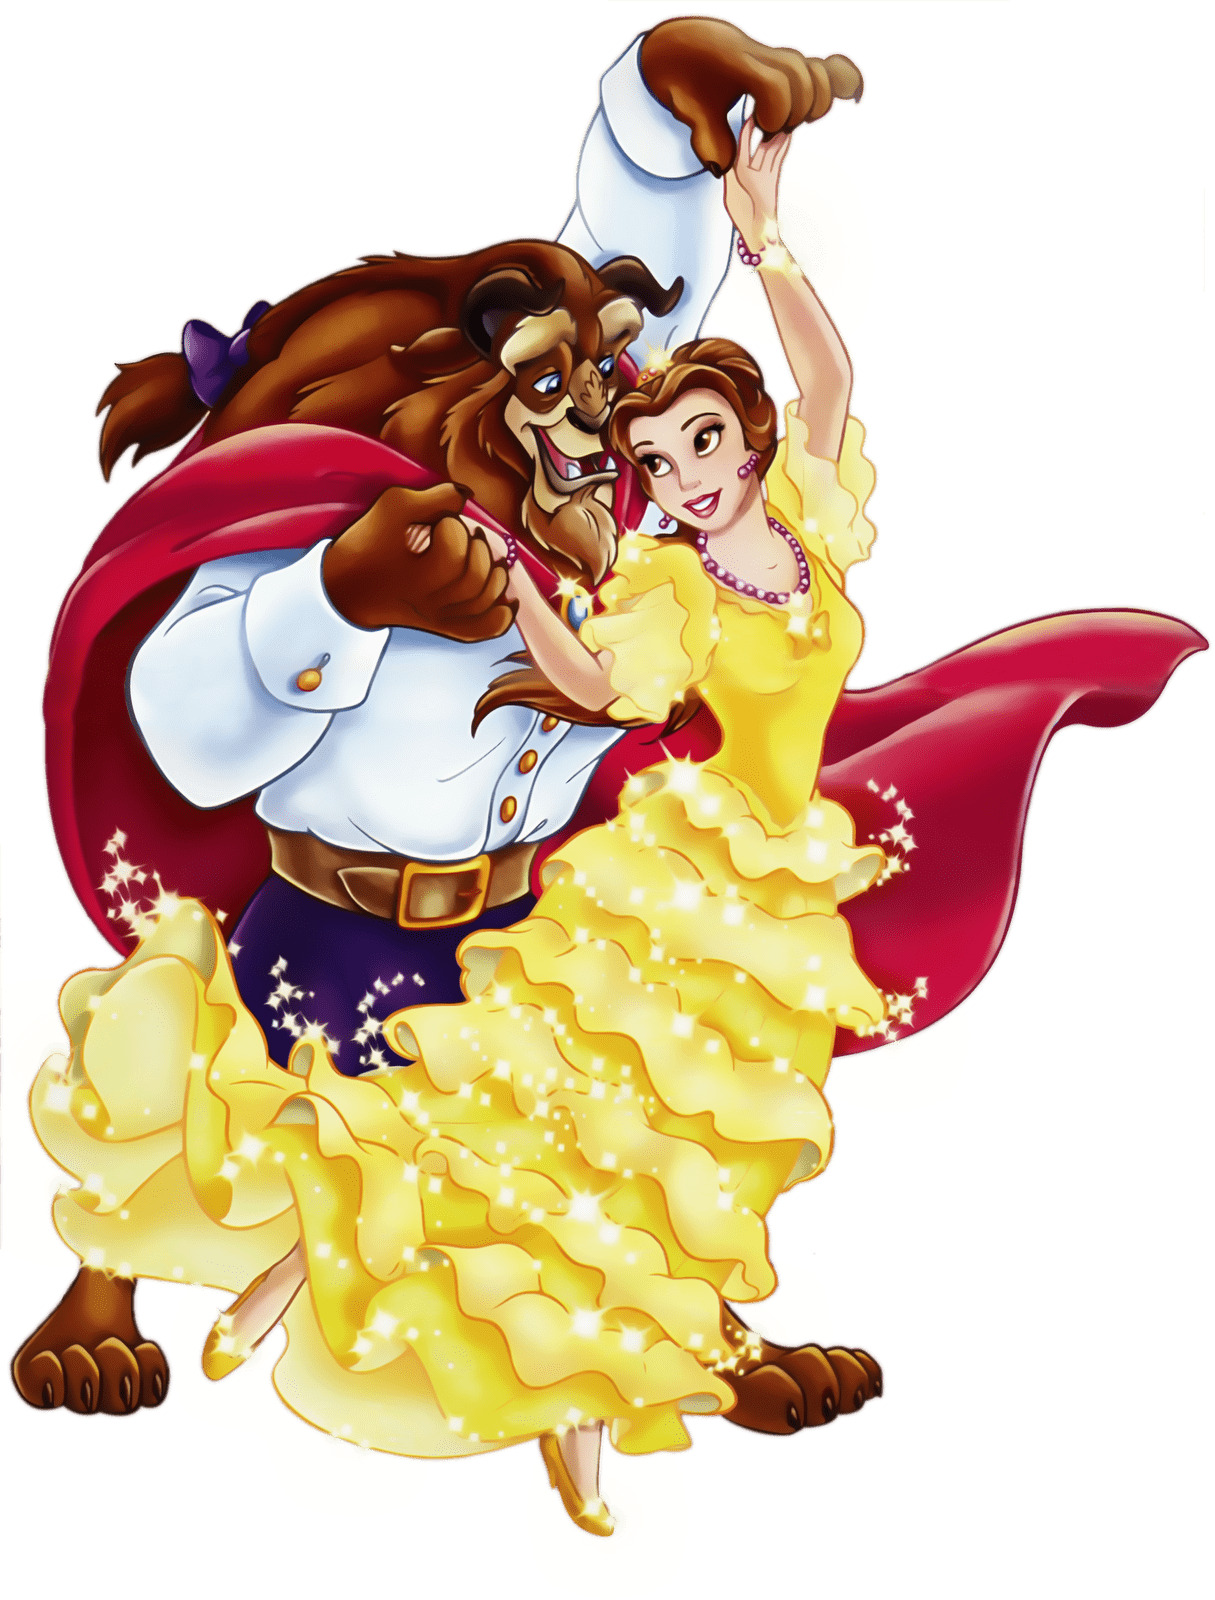 Belle Dancing With the Beast icons